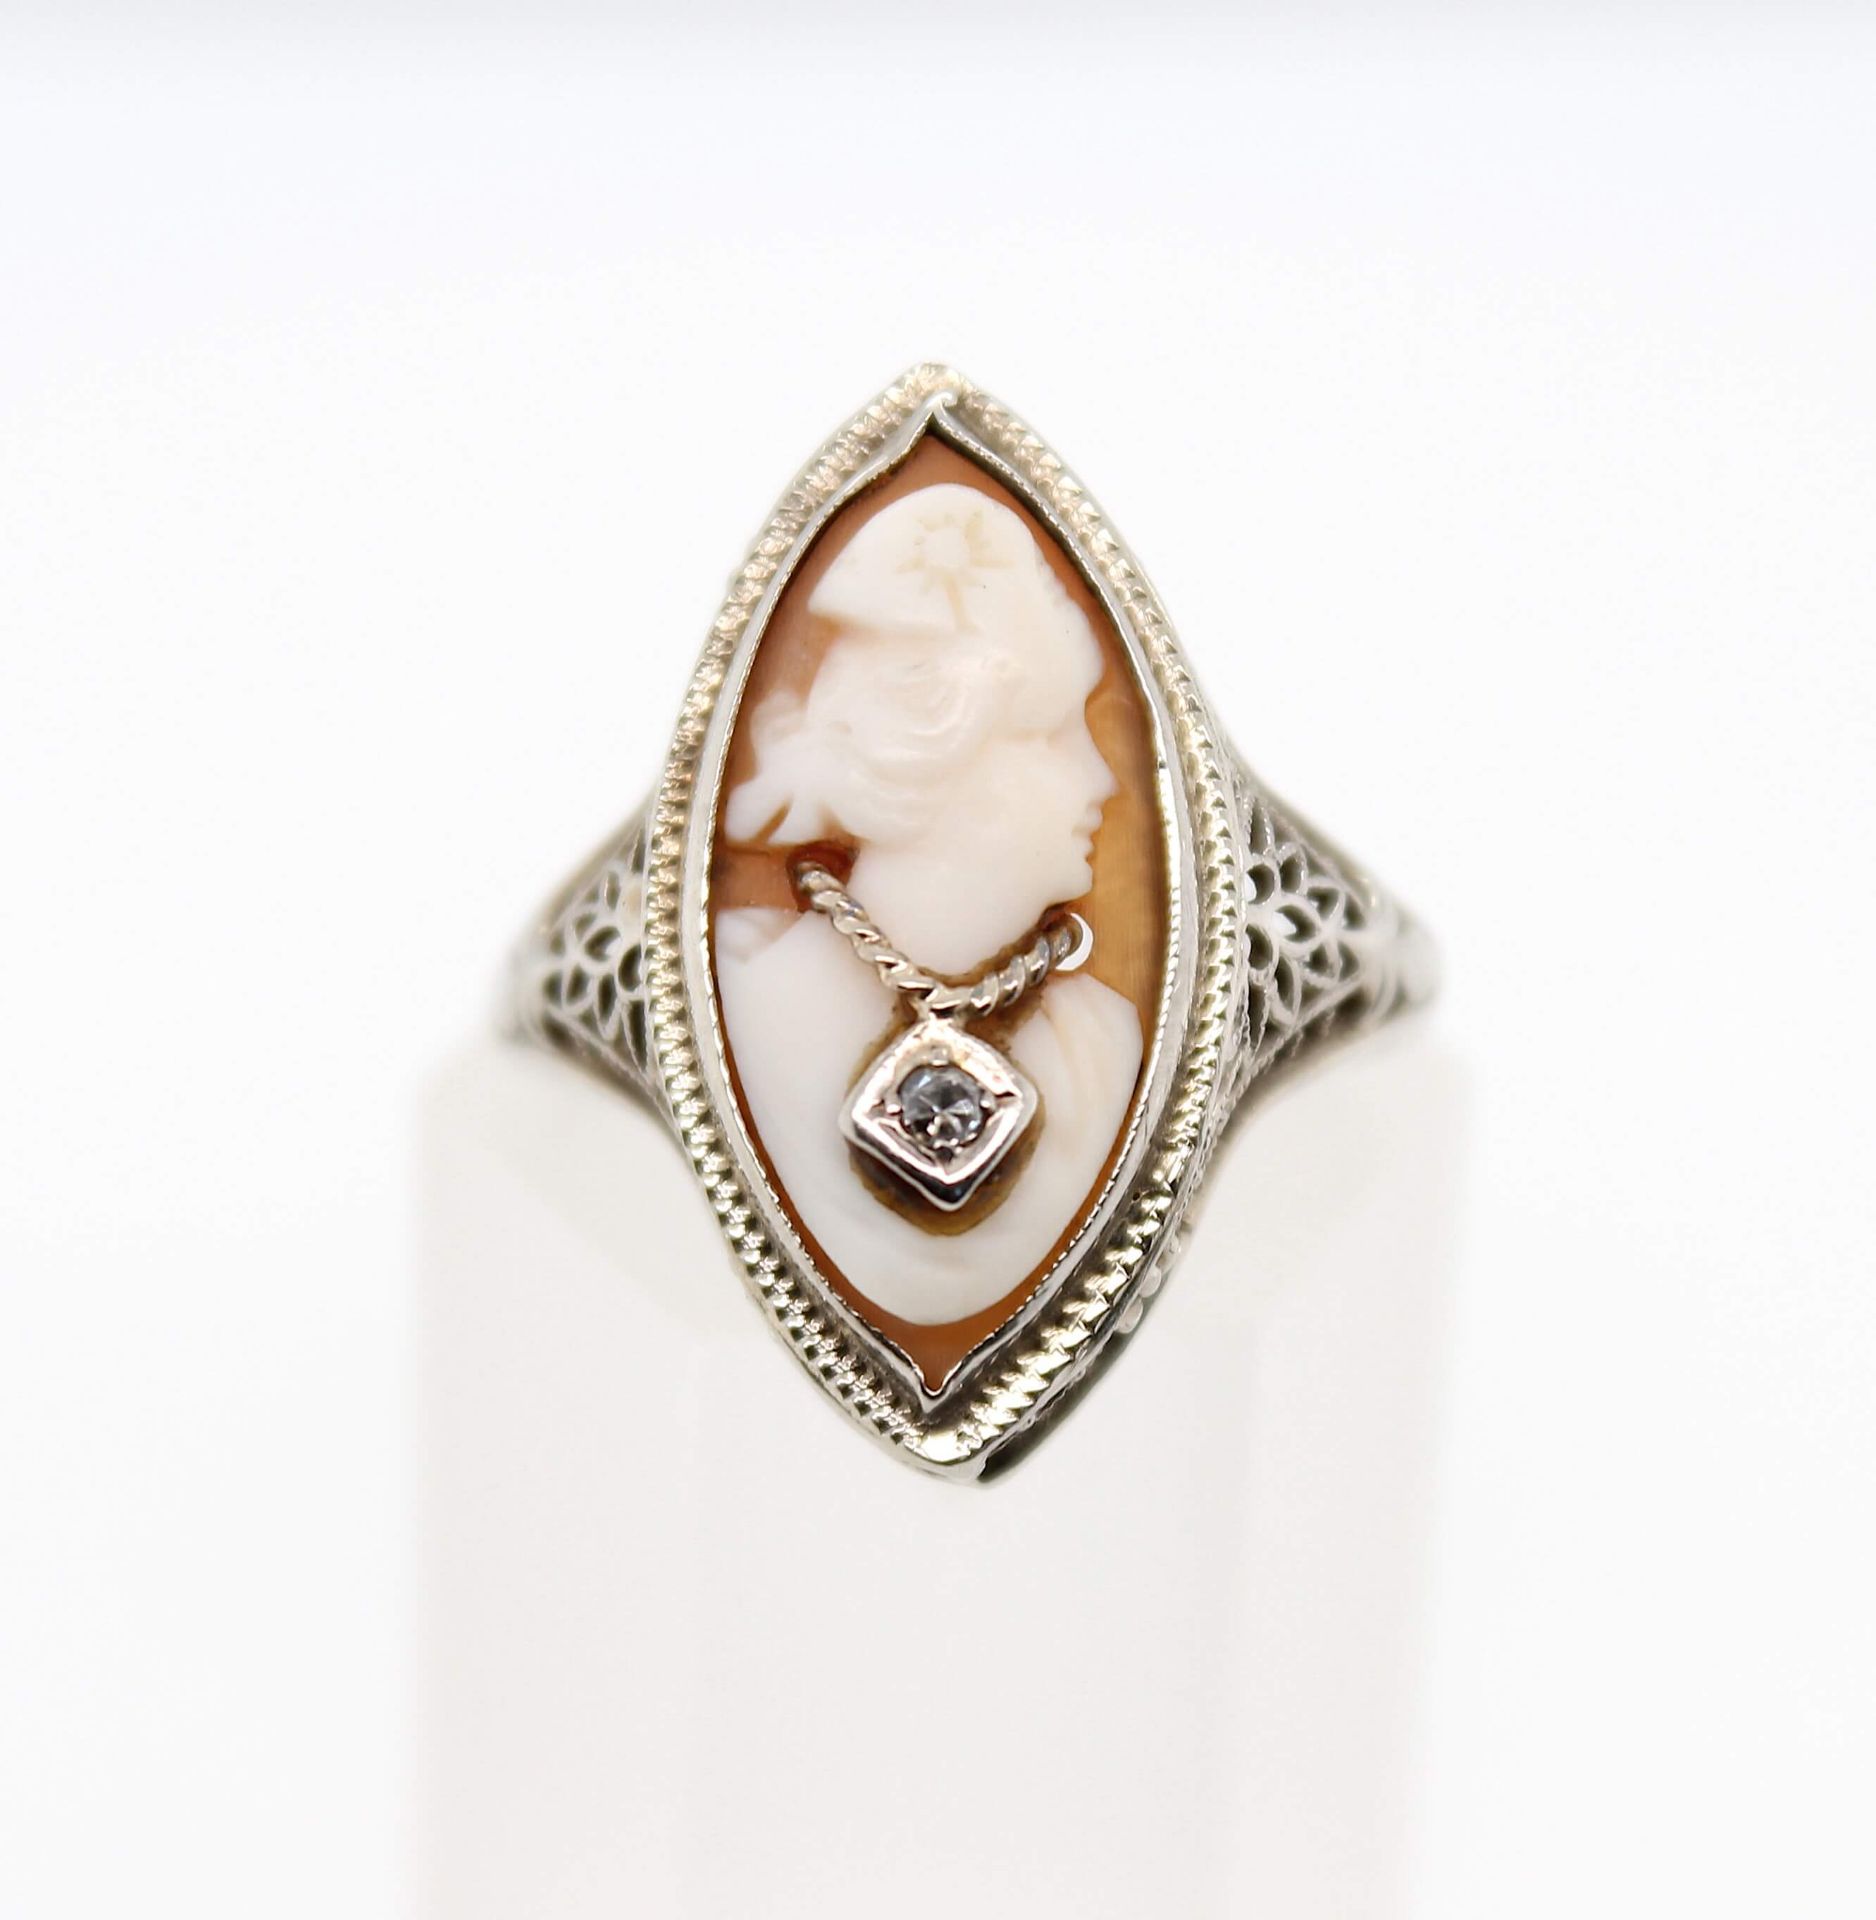 Ring with a shell cameo and a diamond - Image 2 of 3